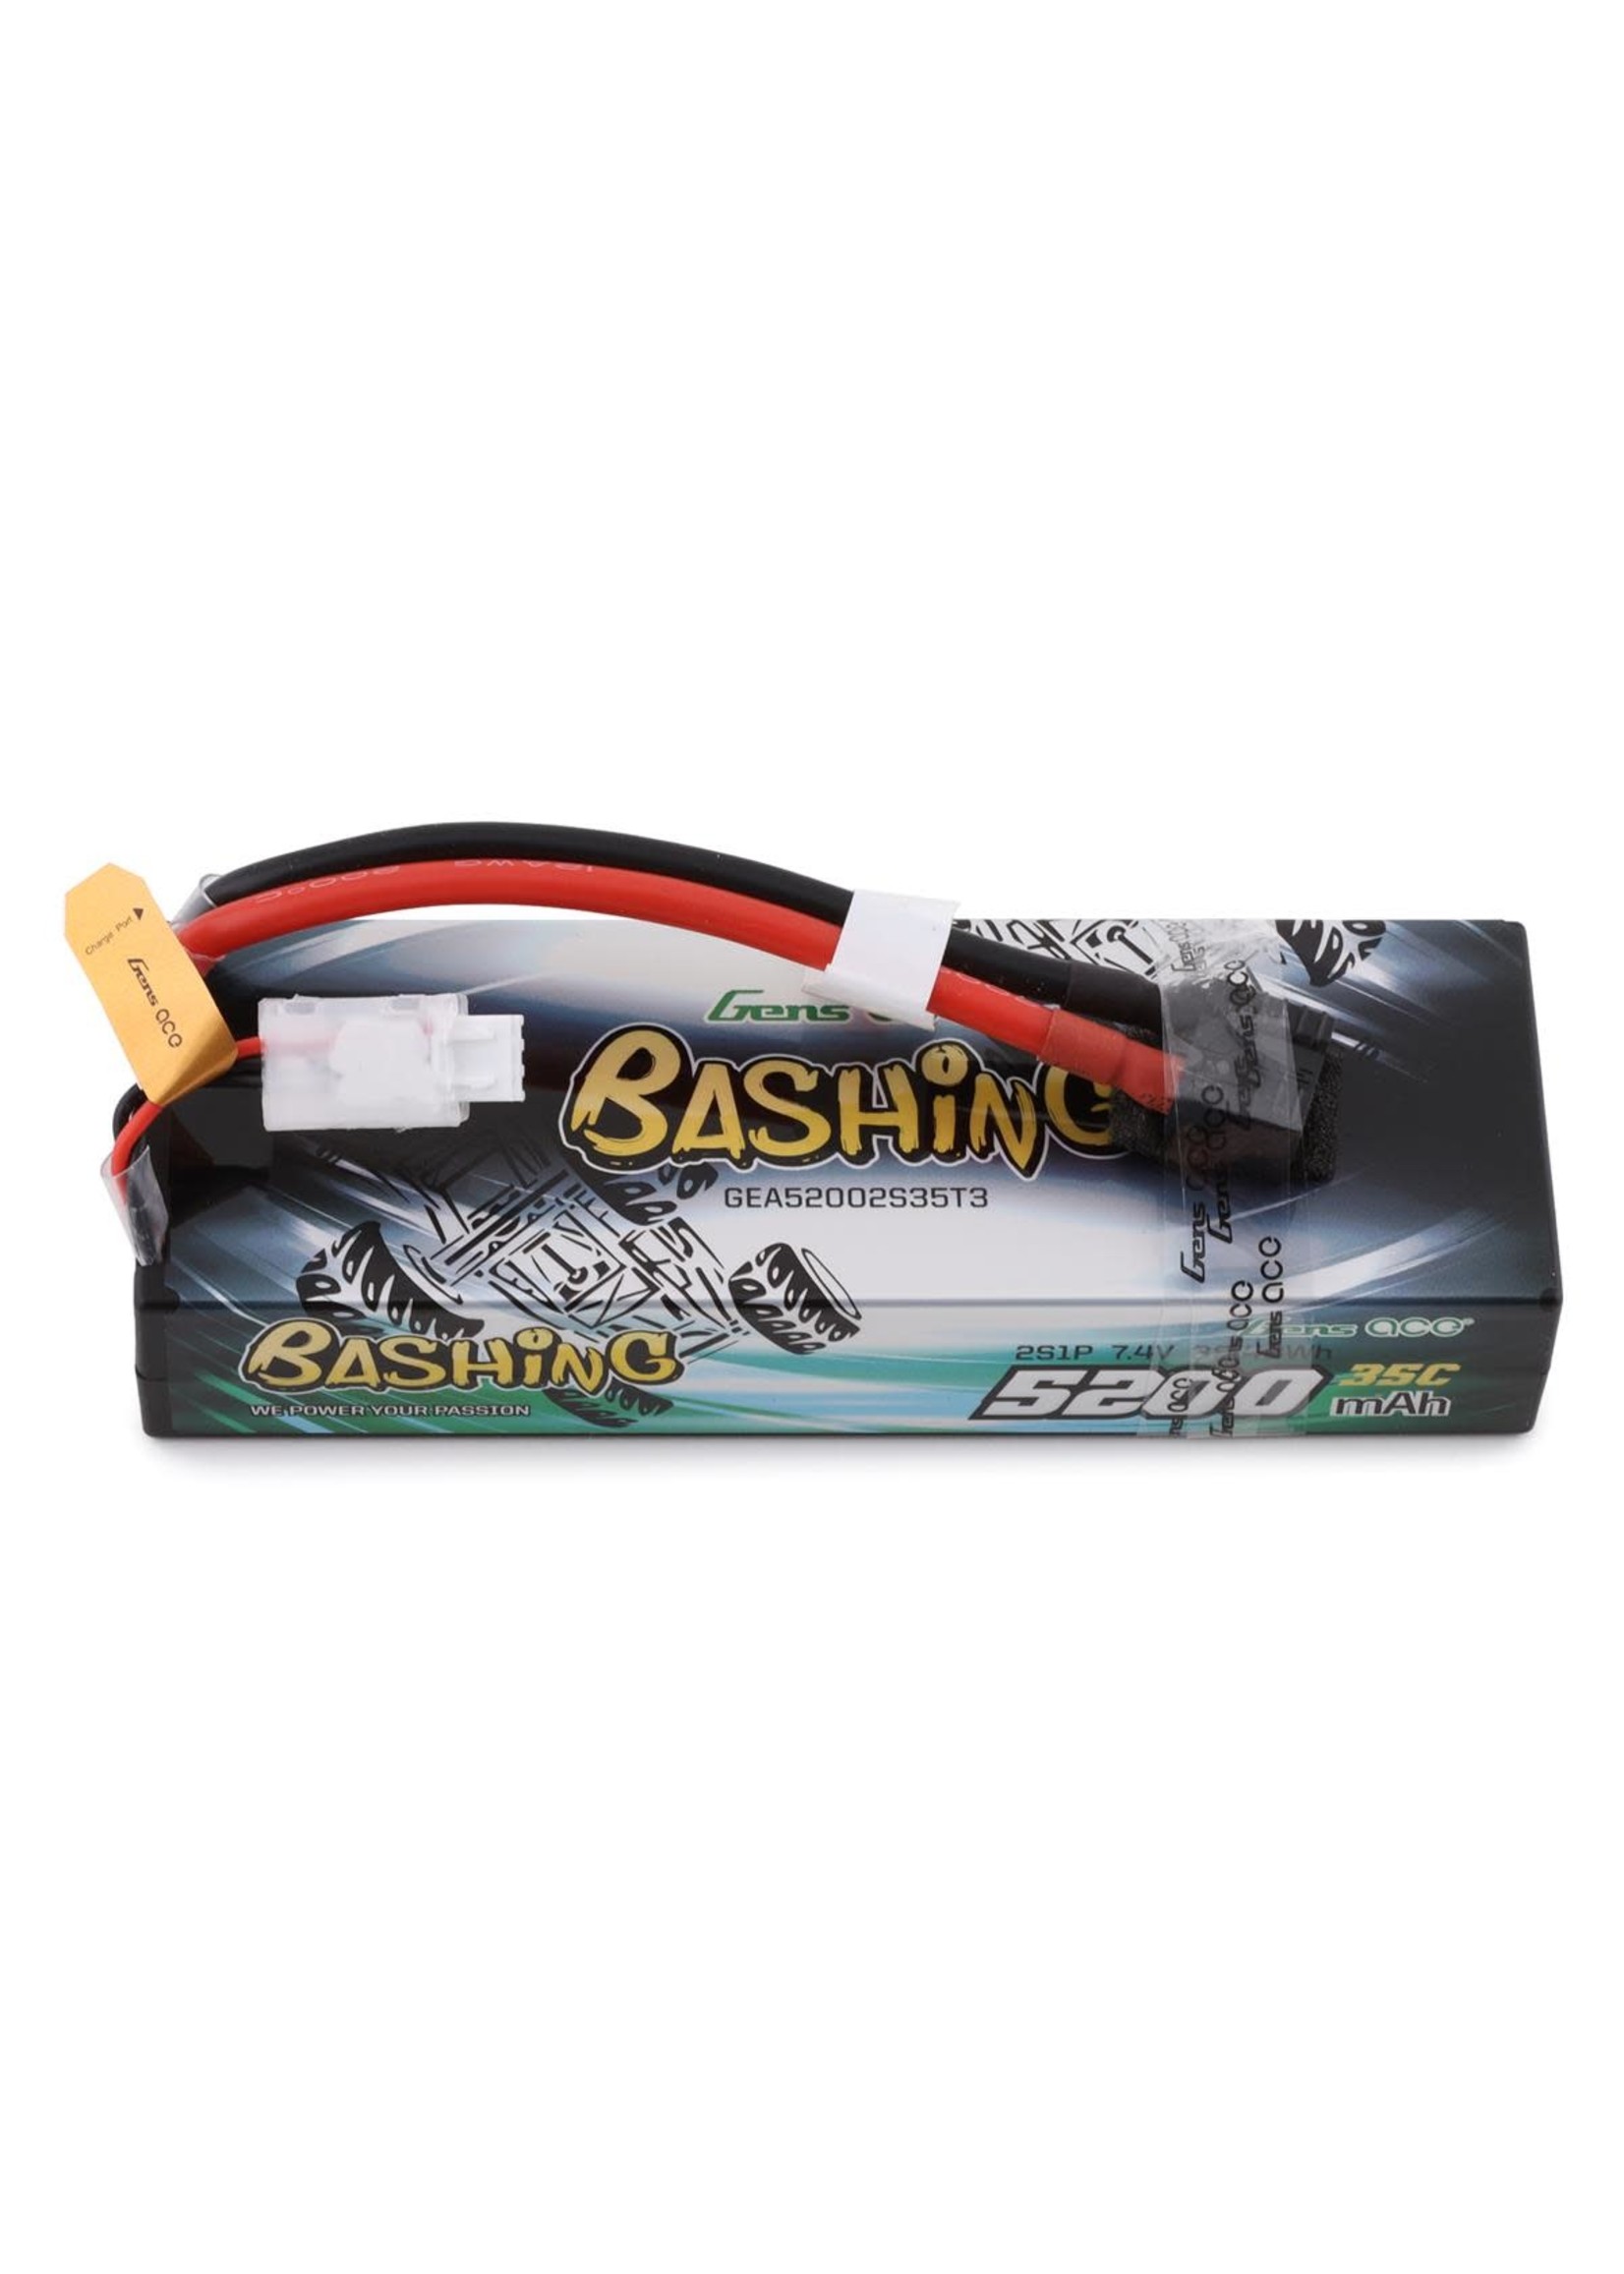 Gens ace GEA52002S35T3 Gens Ace Bashing 2s LiPo Battery Pack 35C (7.4V/5200mAh) w/Universal Connector